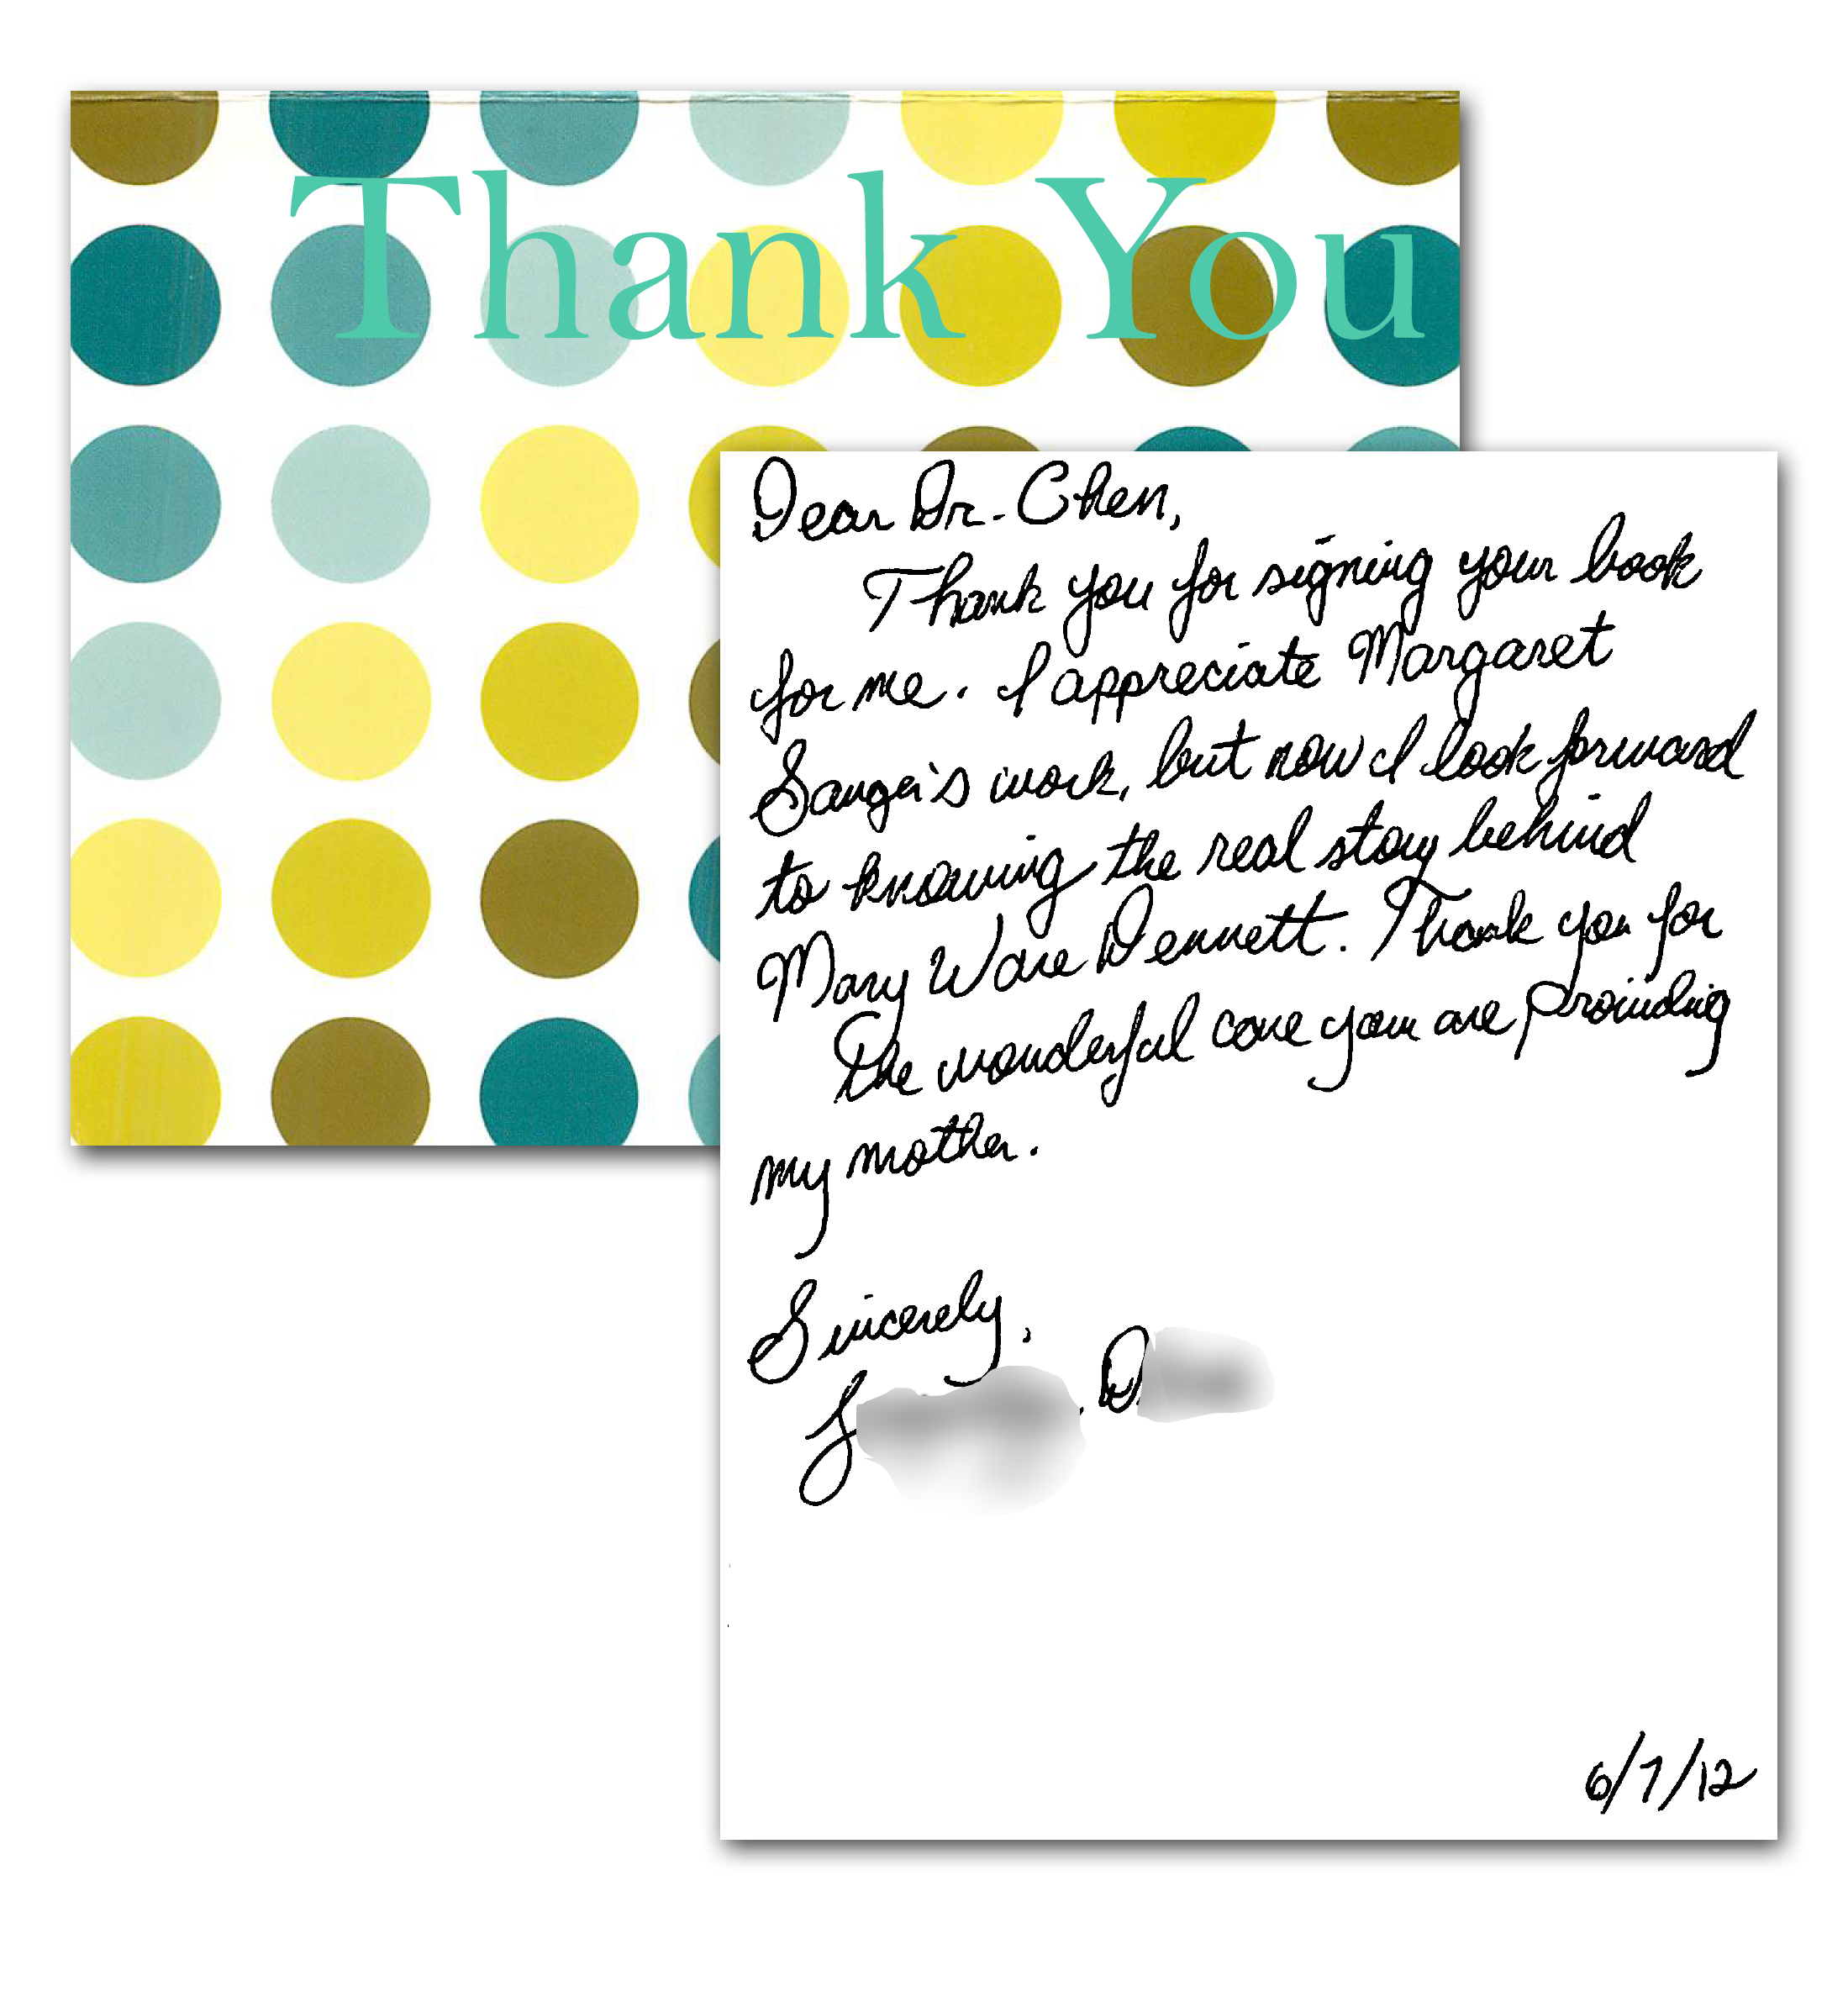 J. Di. thank you note - 6-11-12.png